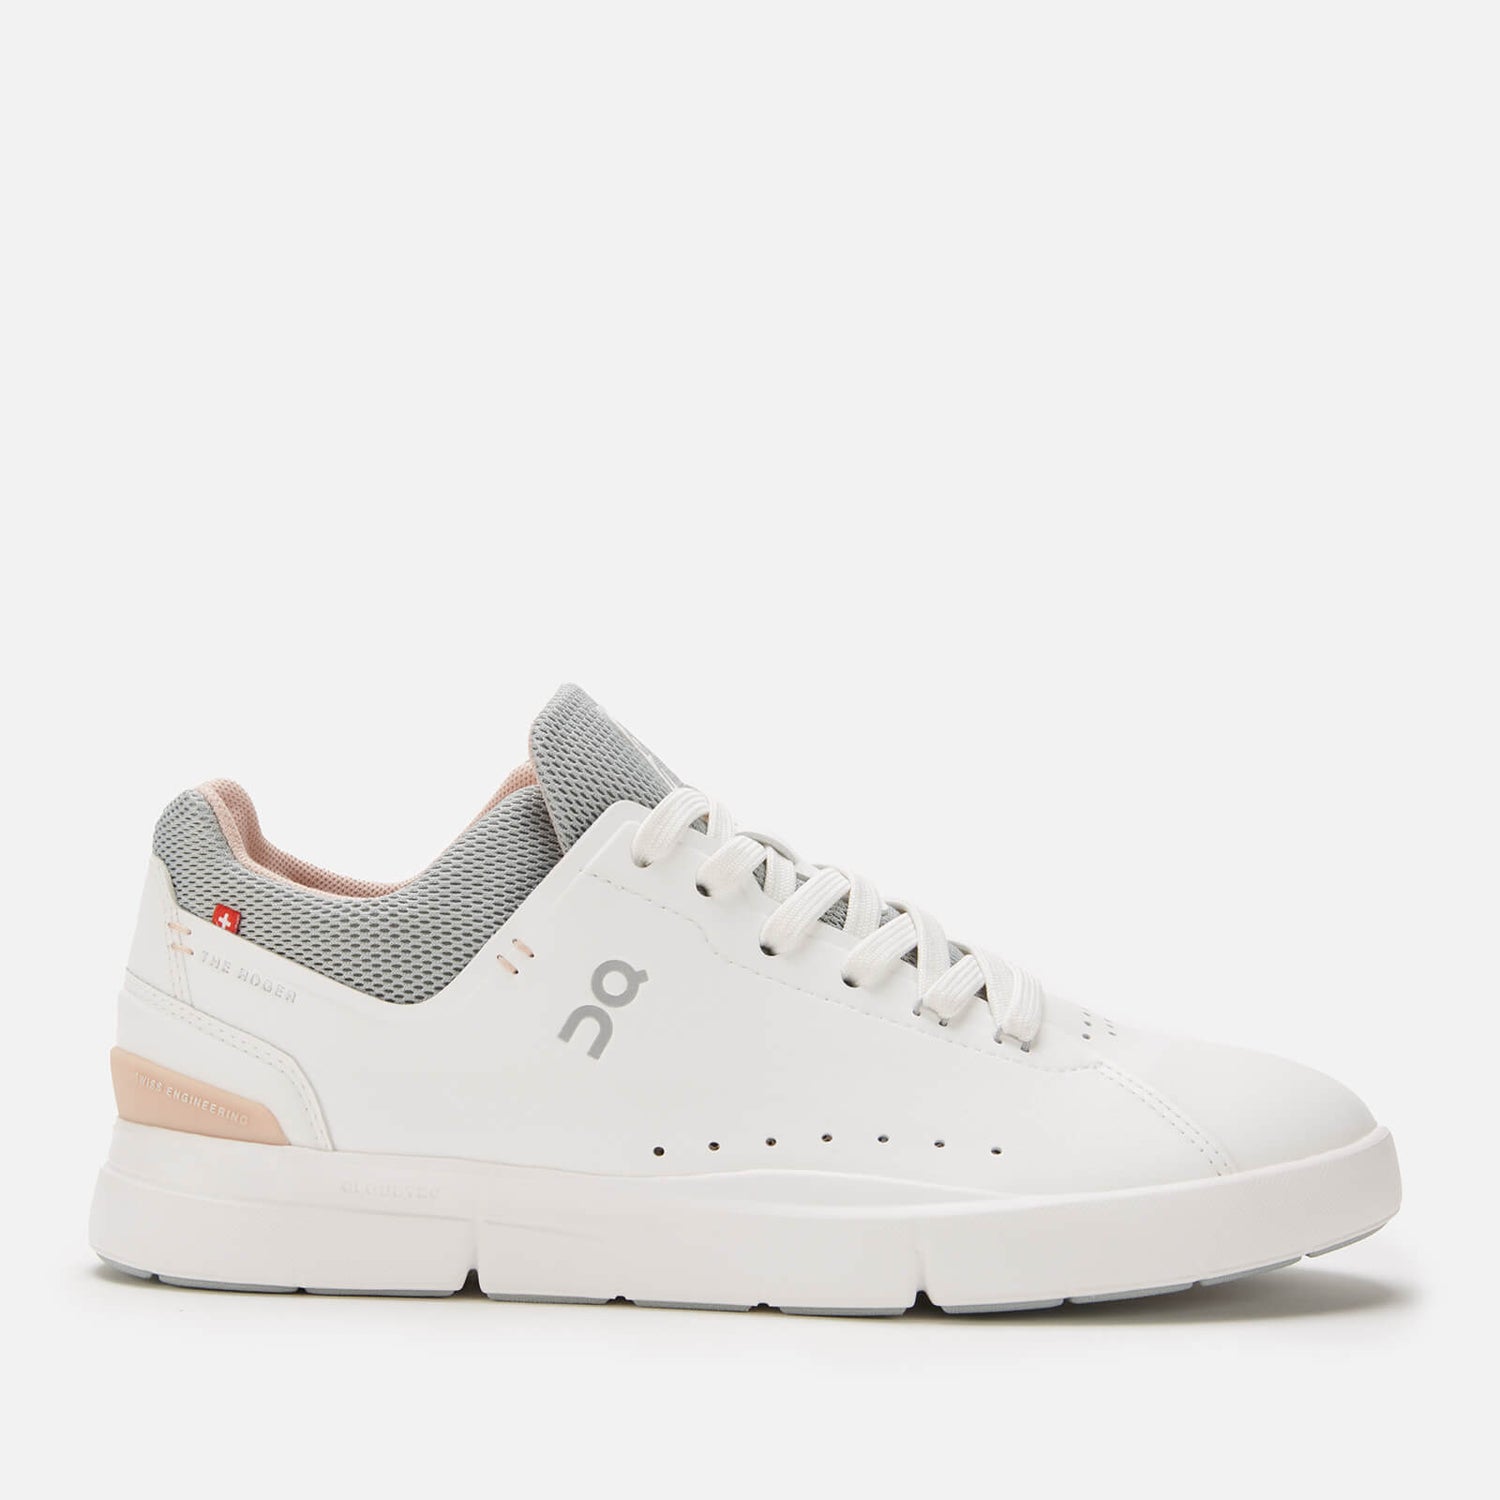 ON Women's The Roger Advantage Court Trainers - White/Rose